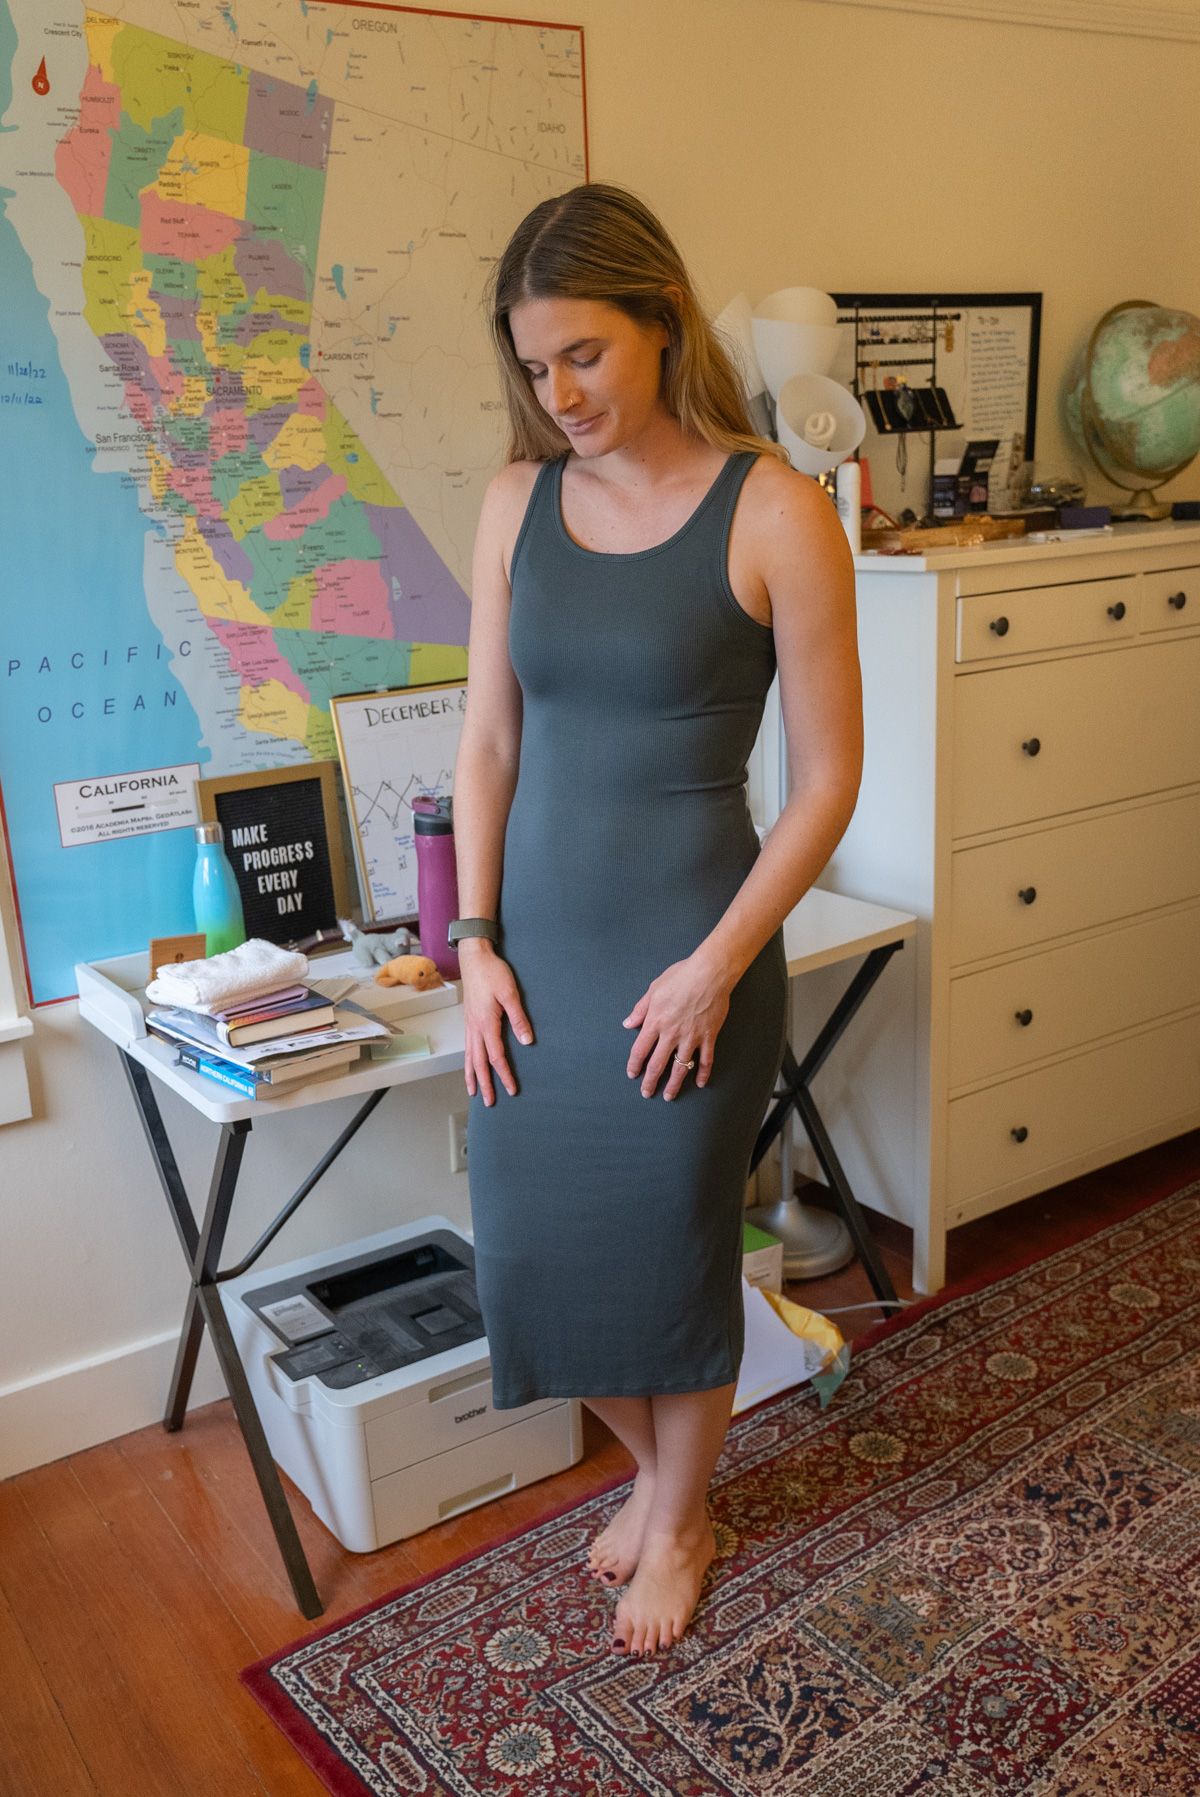 A young woman wearing a grey Tencel Rib Knit Sleeveless Dress stands looking down in an interior setting with a map of California on the wall behind her.